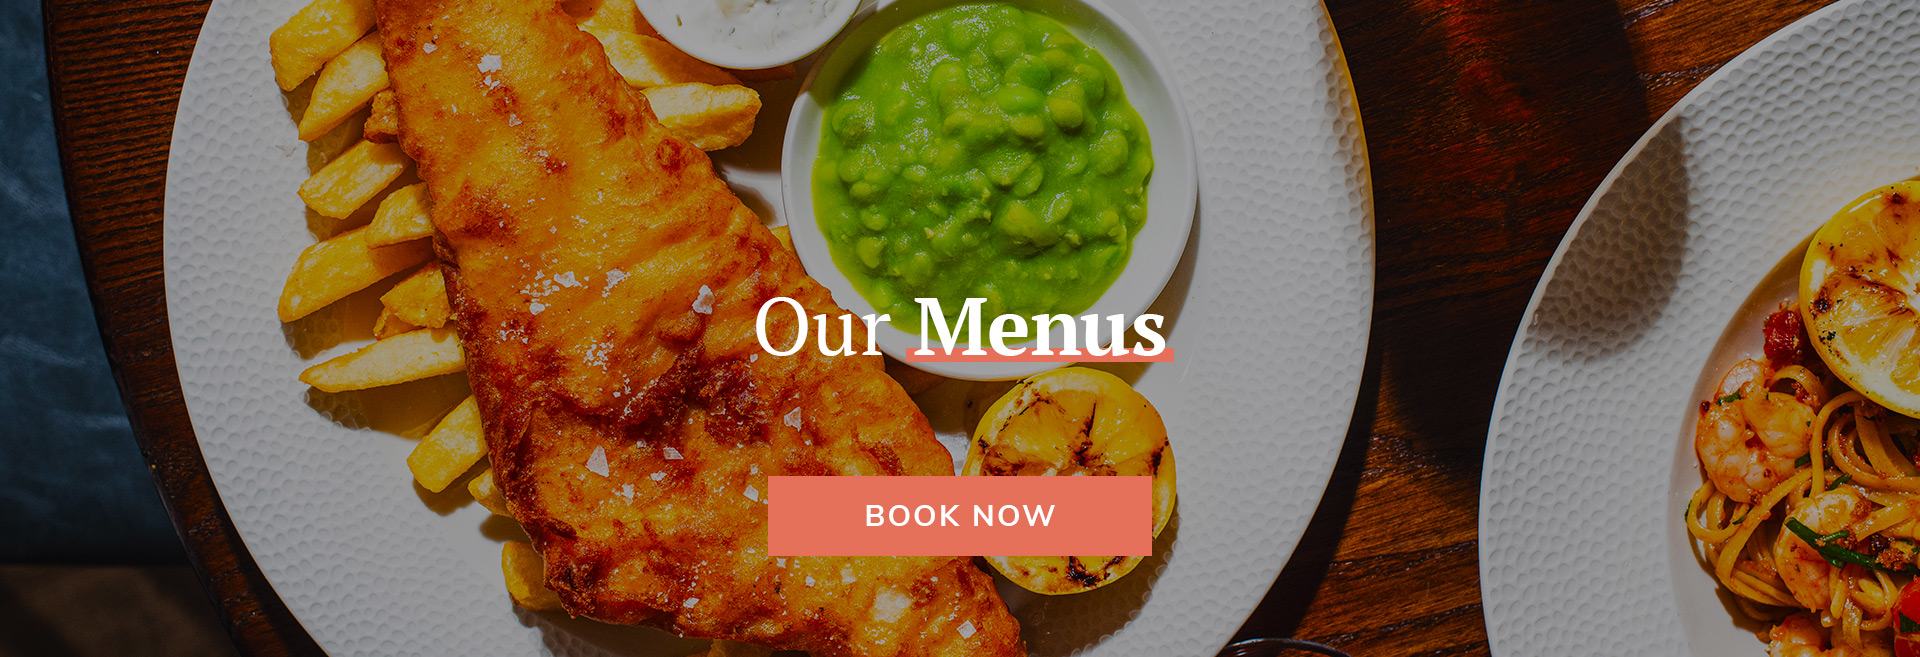 Book Now at The Gipsy Moth